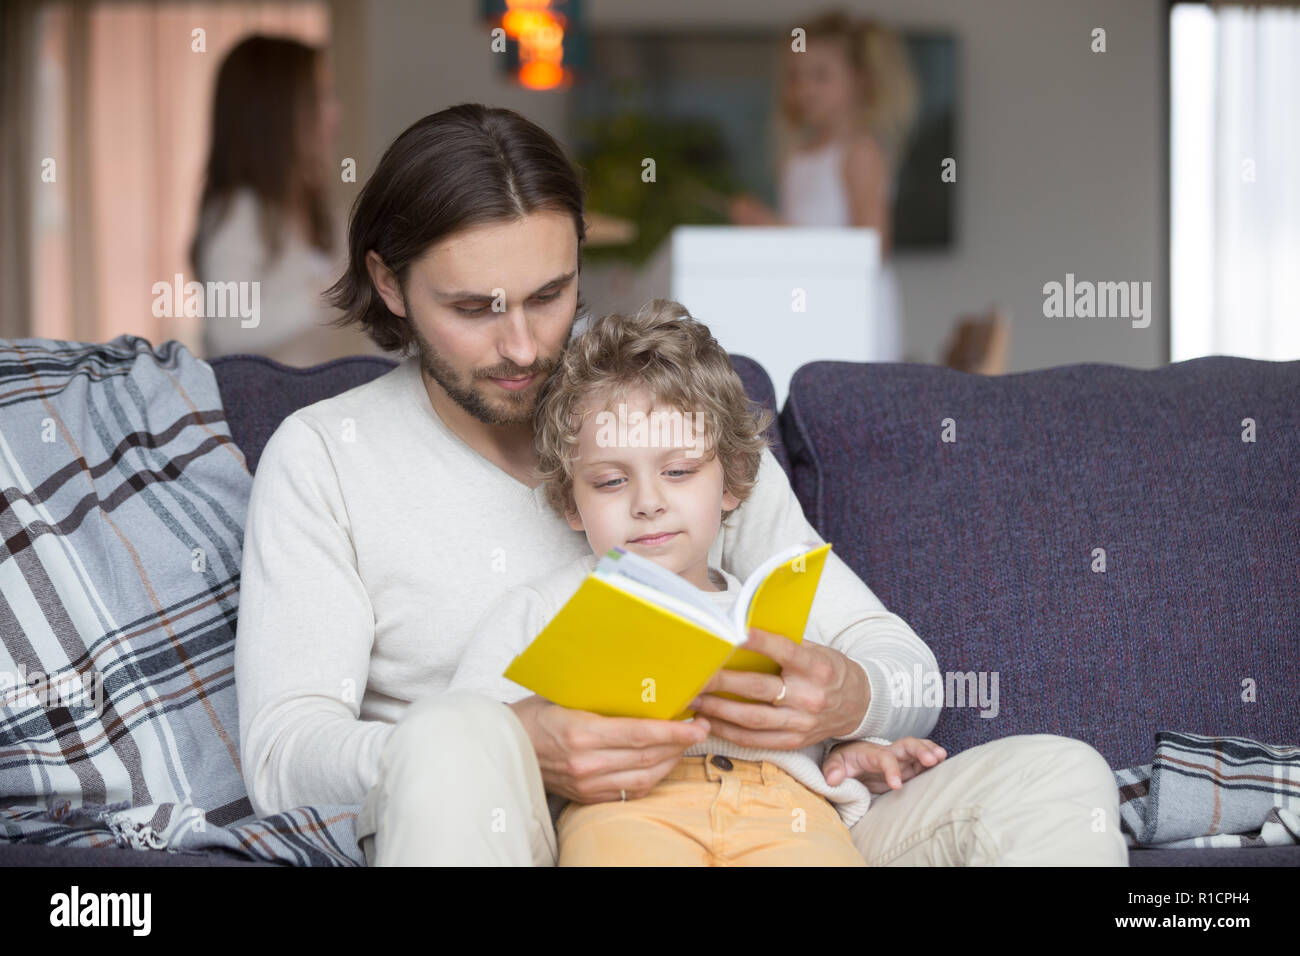 Father and son with fairytale book on couch Stock Photo